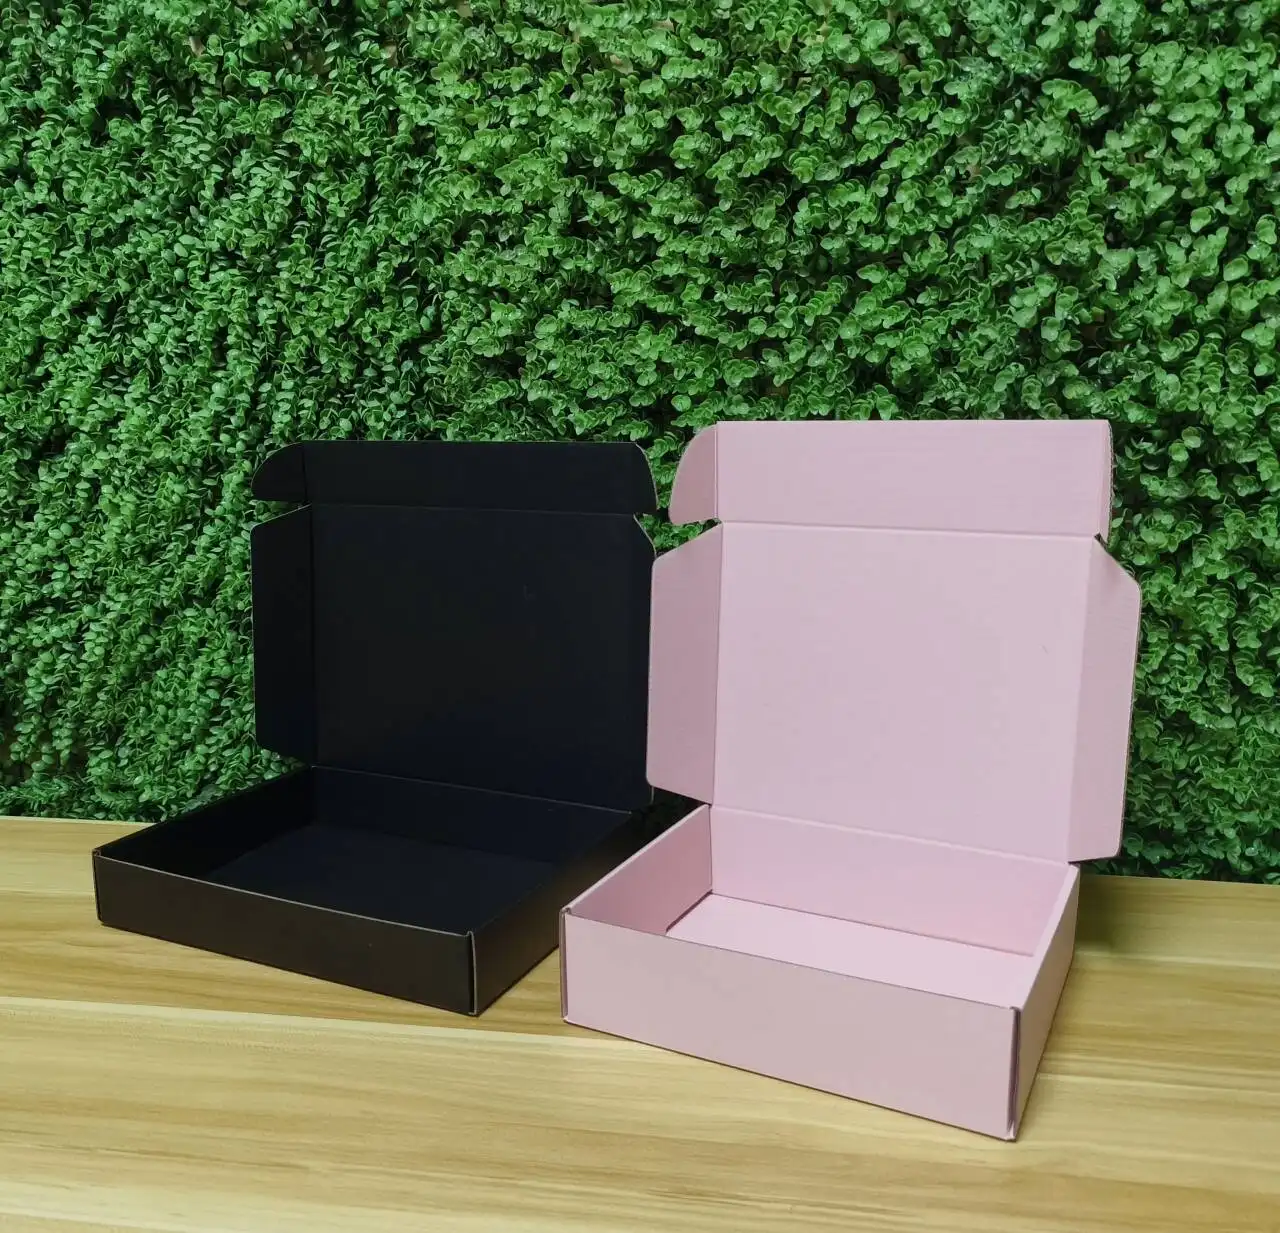 AT PACK FSC Durable Black Corrugated Paper Boxes Embossed Print Pattern for Takeaway Soda Shipping Containers